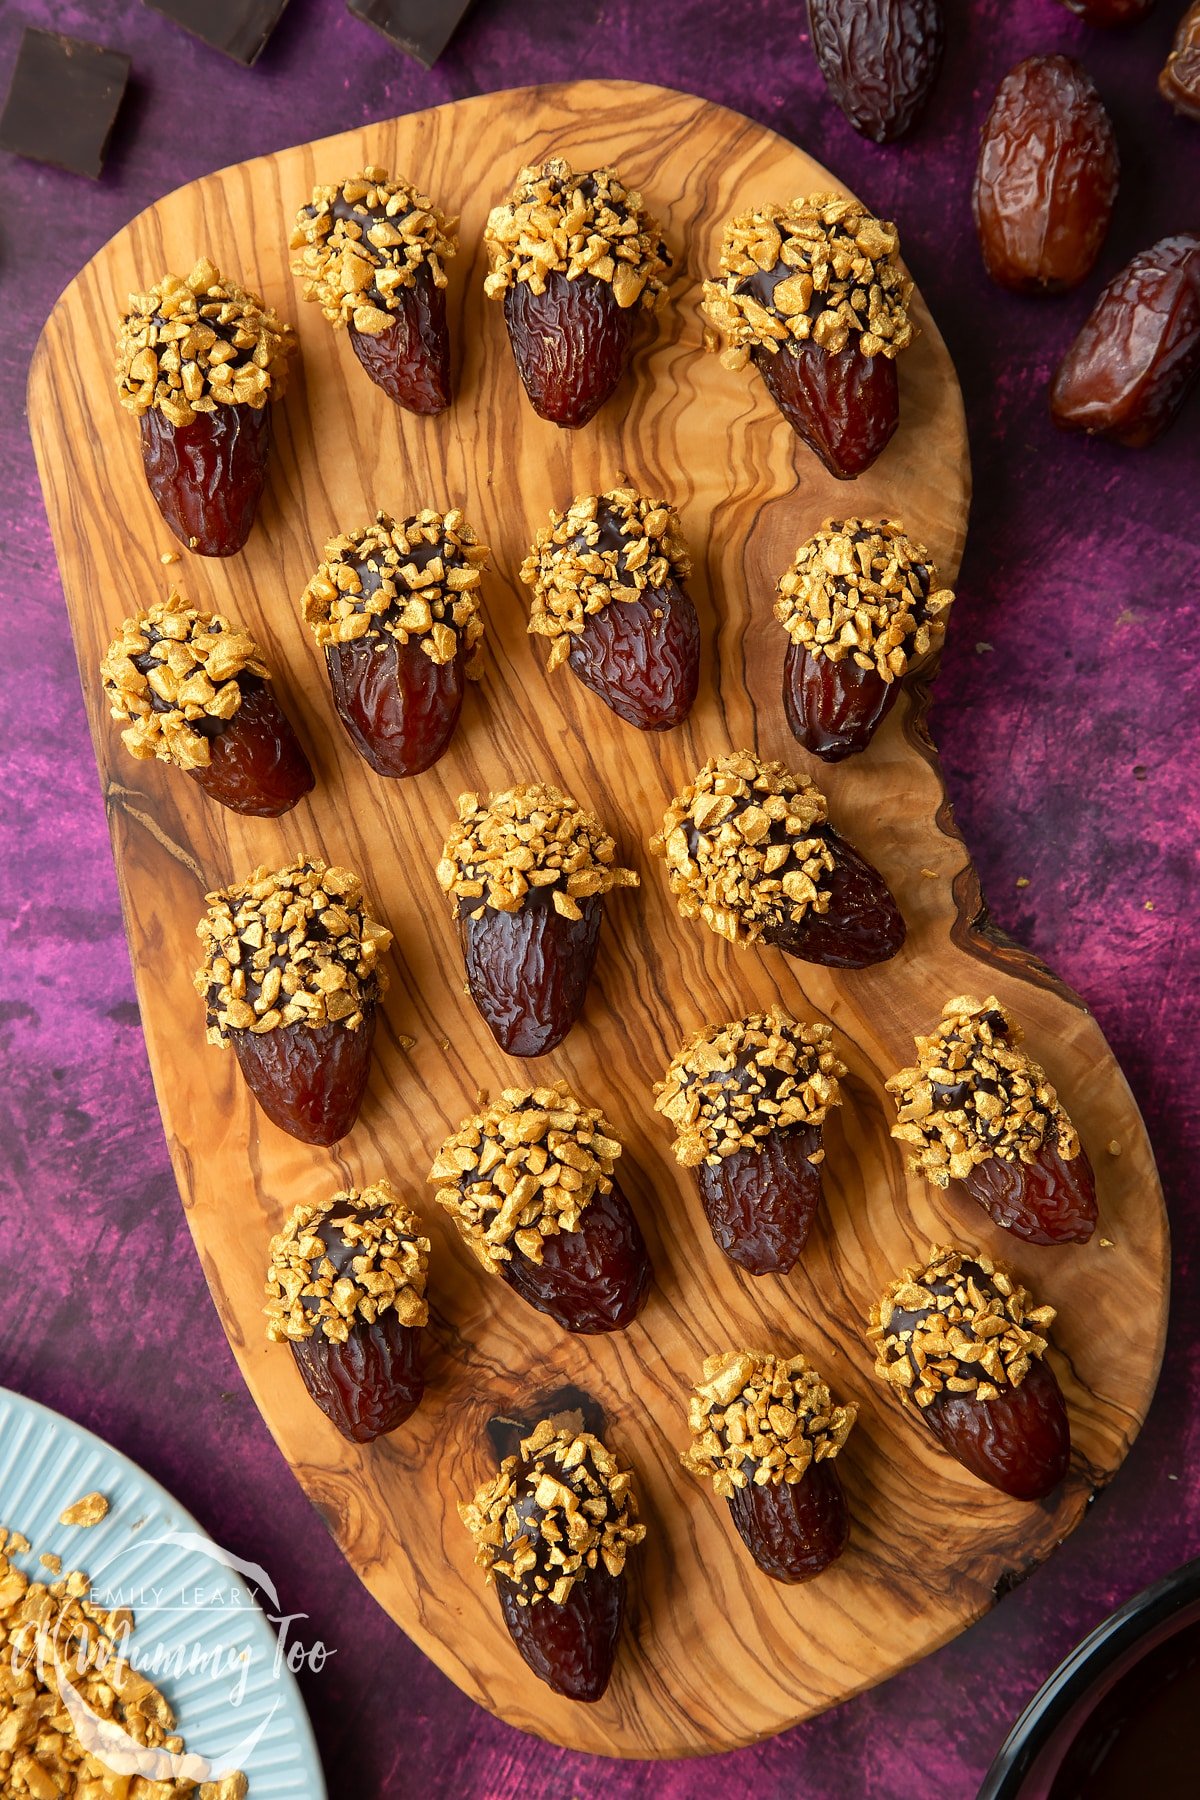 Medjool dates dipped in chocolate. The chocolate dates are on a wooden board and have be studded with gold chopped nuts. Nuts and chocolate surround the board.